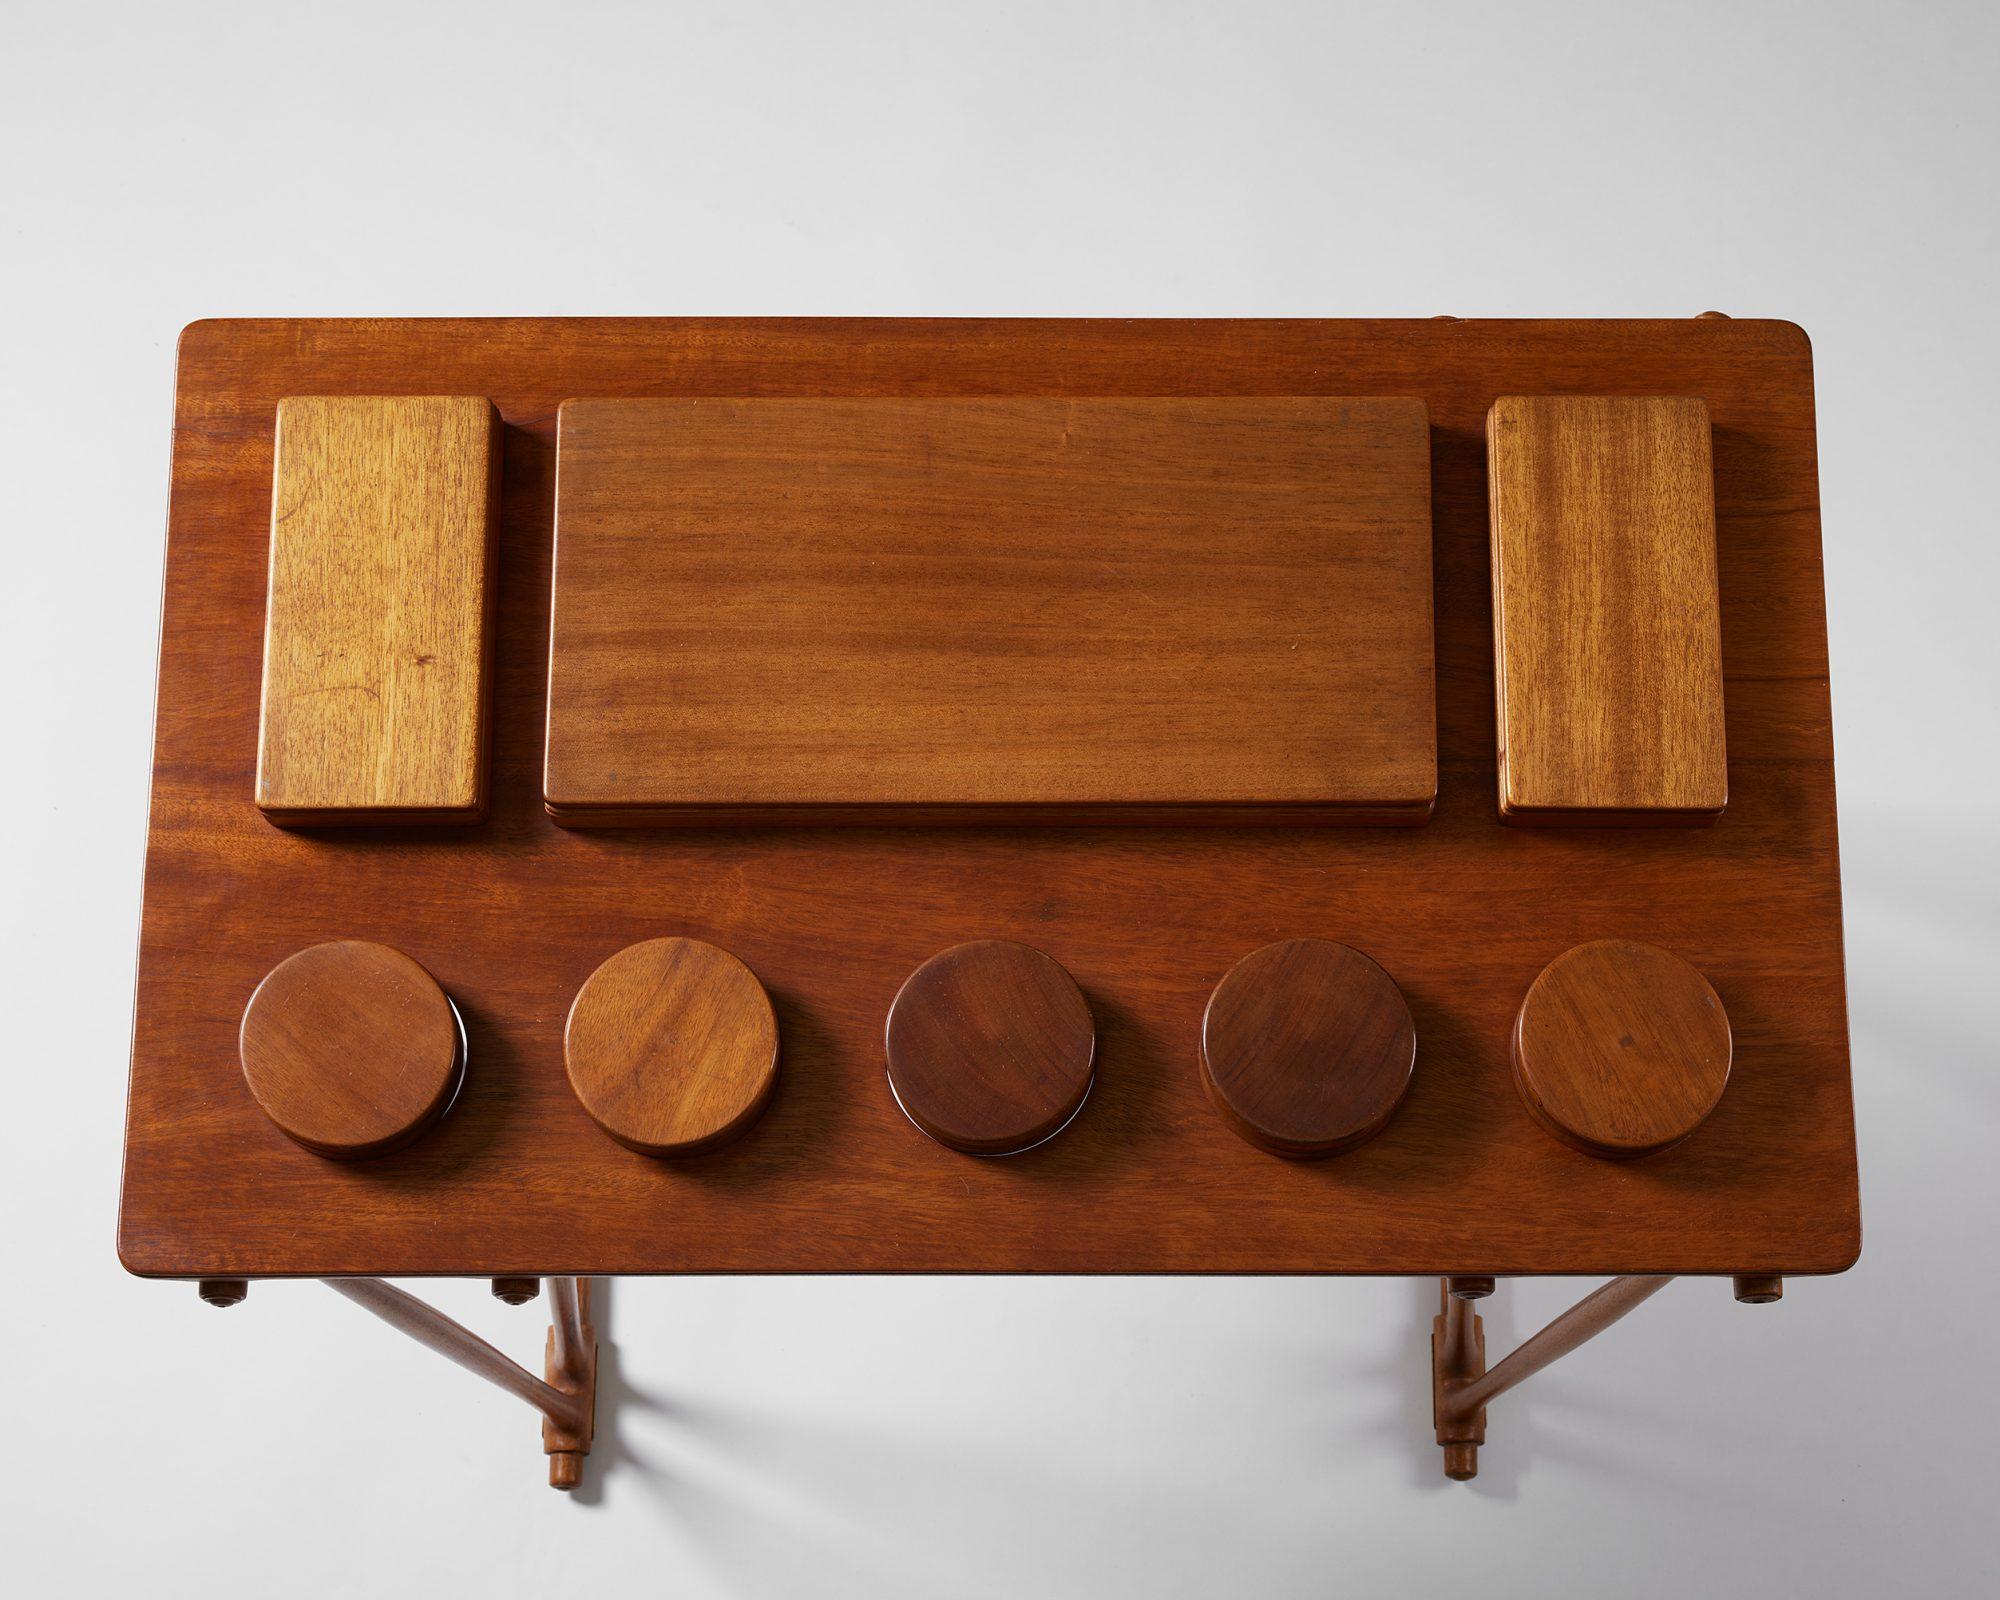 Brass Table with compartments designed by Brockmann Petersen for Louis G Thiersen